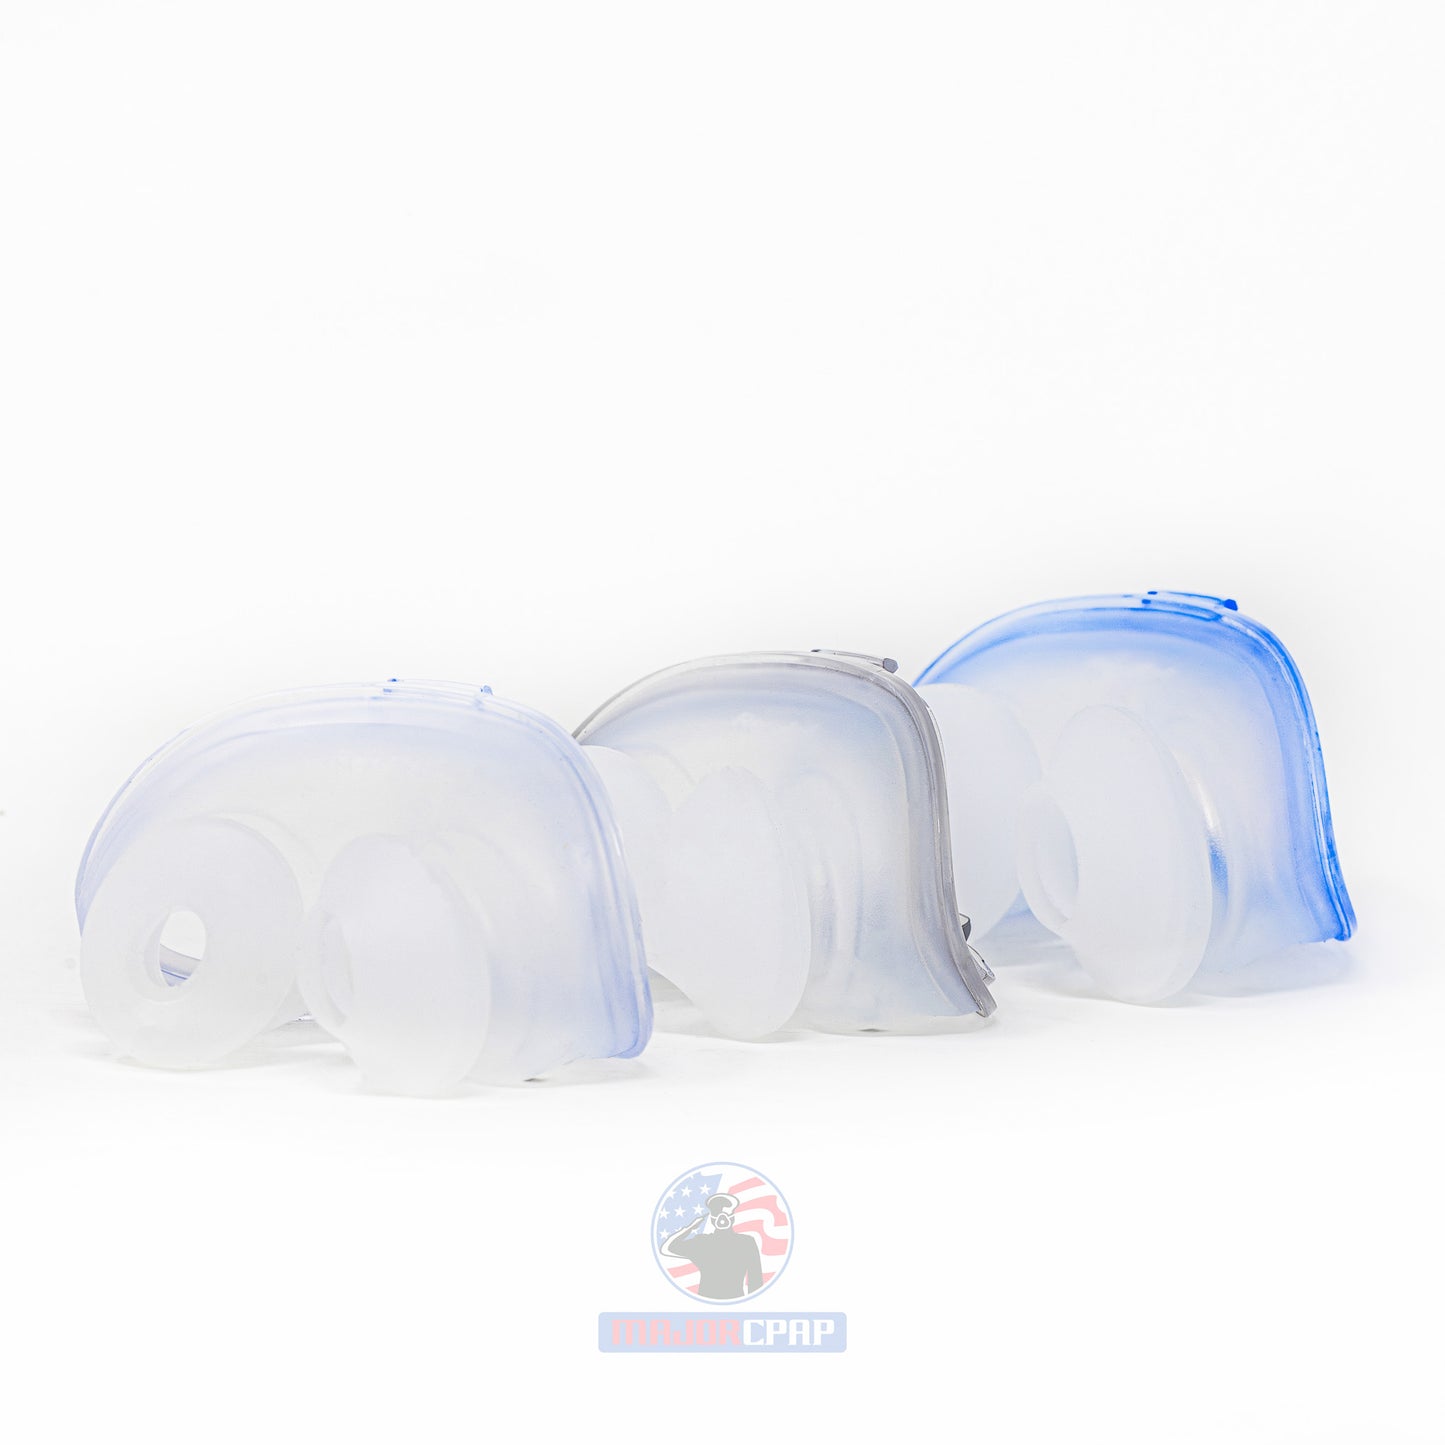 ResMed AirFit P10 Nasal Pillows Mask with Headgear FitPack